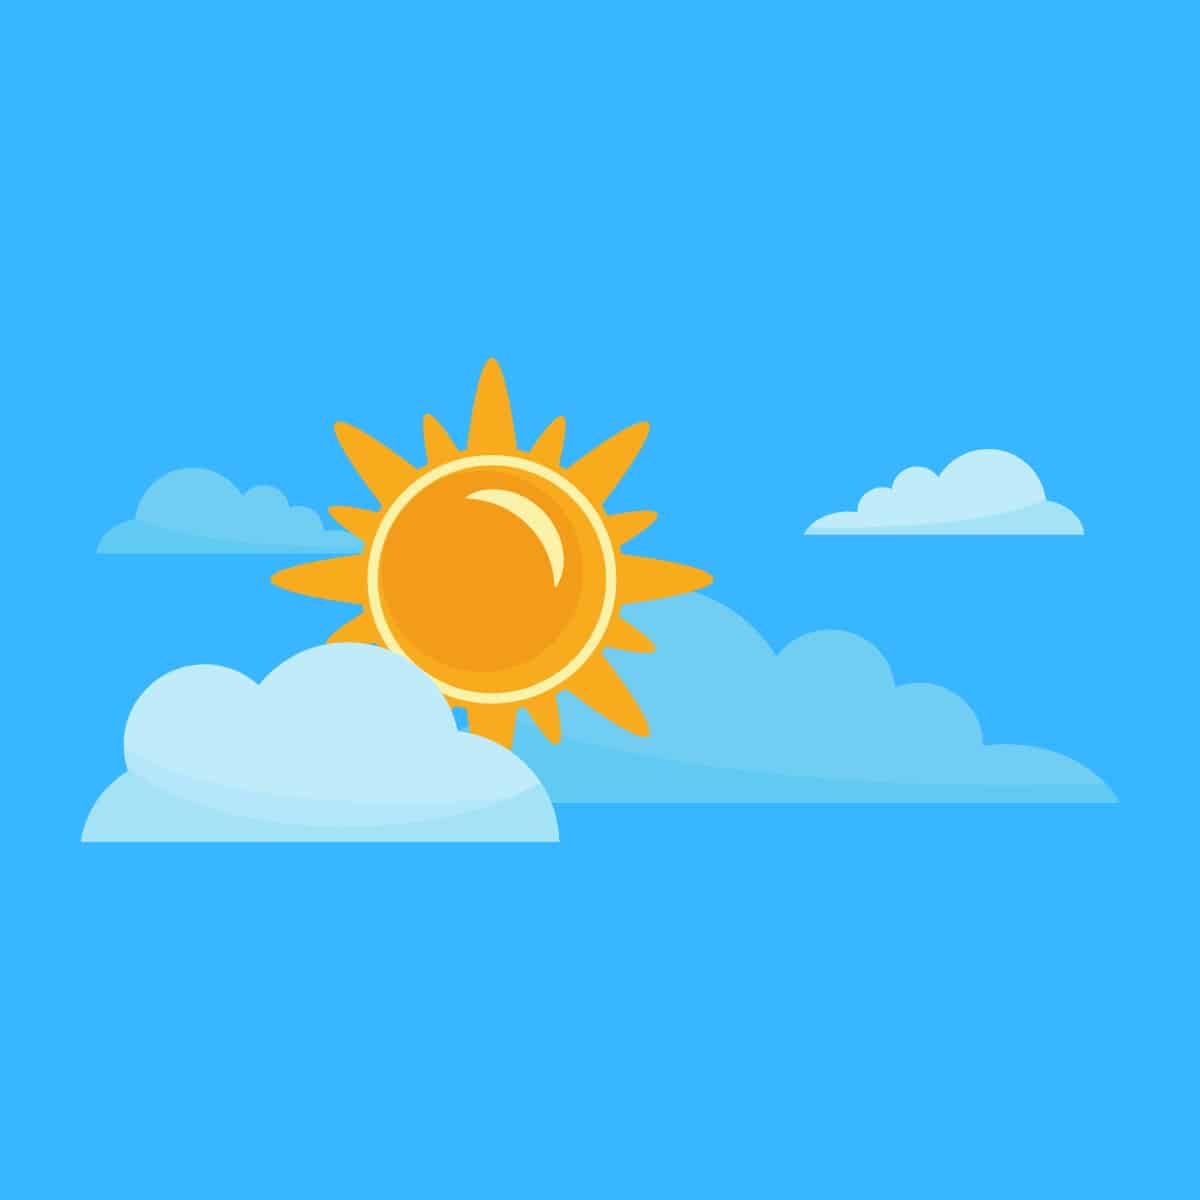 Cartoon graphic of the sky clouds and sun on a blue background.